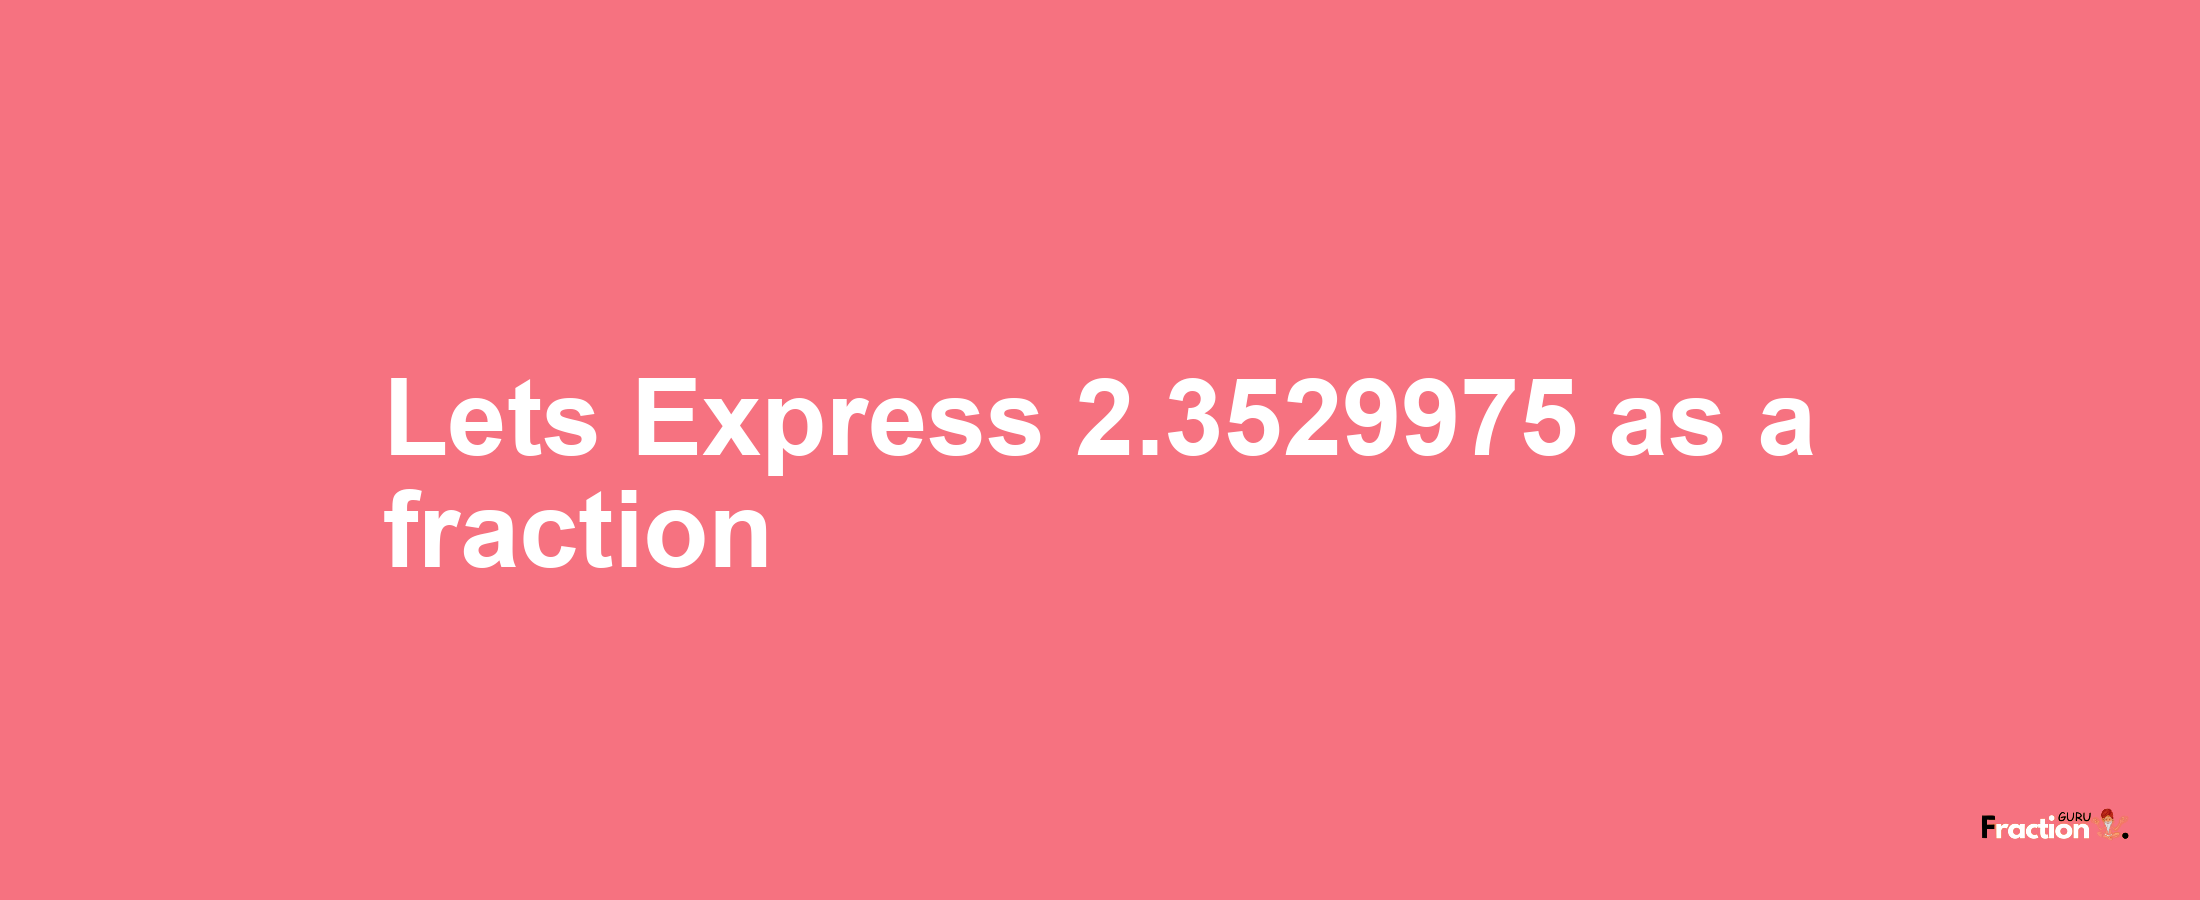 Lets Express 2.3529975 as afraction